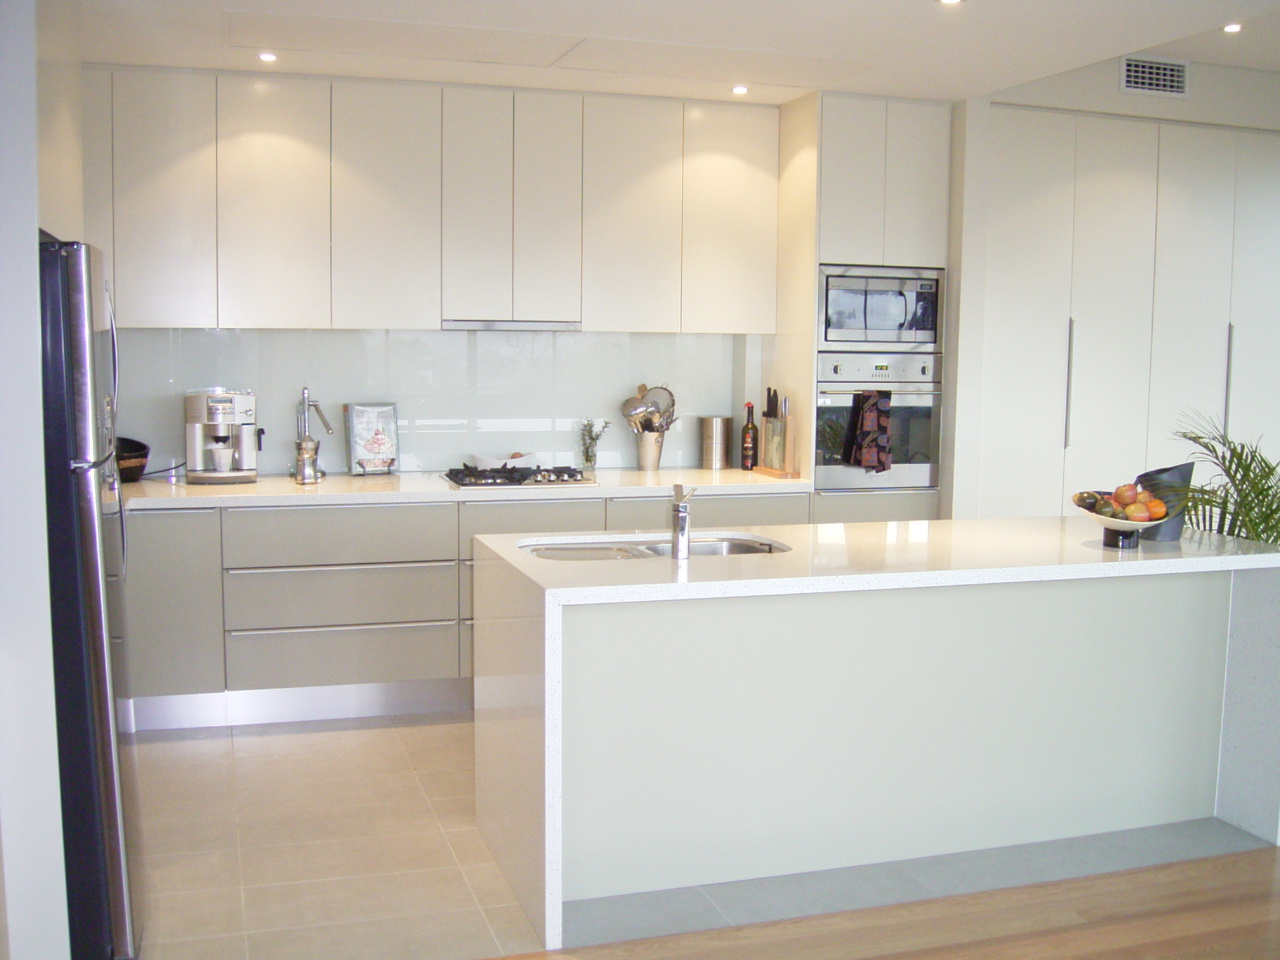 9 reasons why you should consider a flat pack kitchen - The